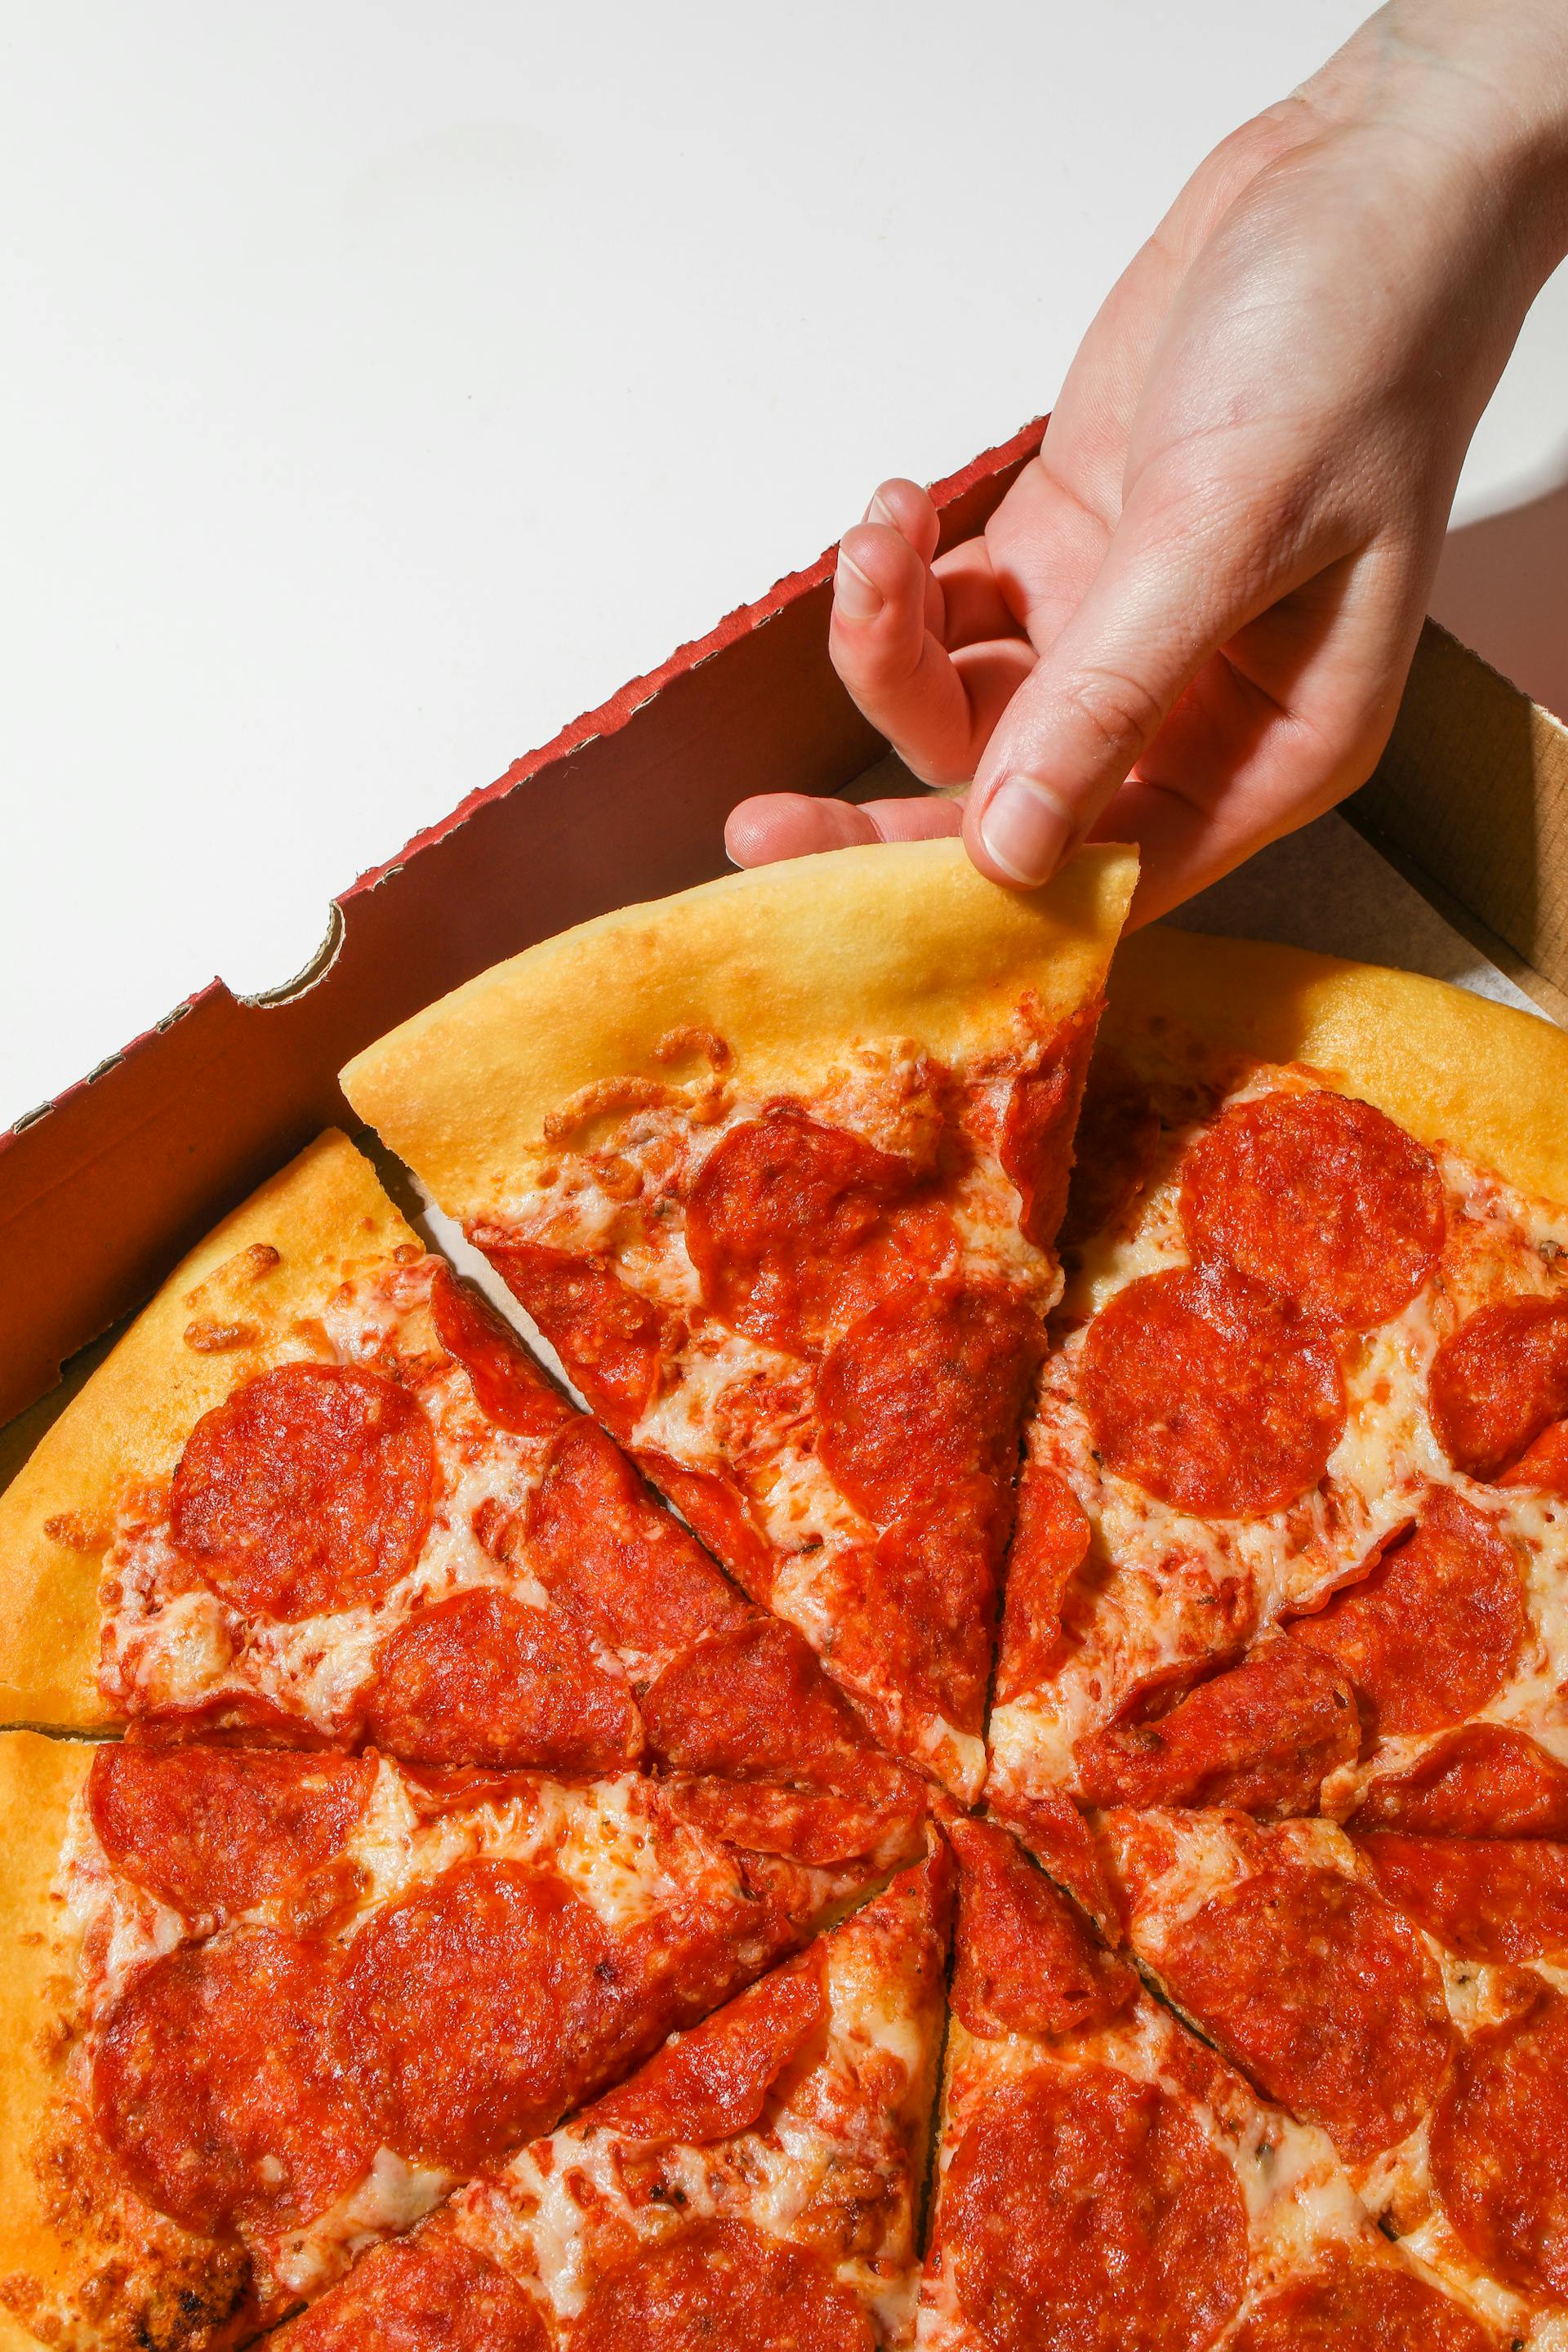 A person holding a slice of pizza | Source: Pexels